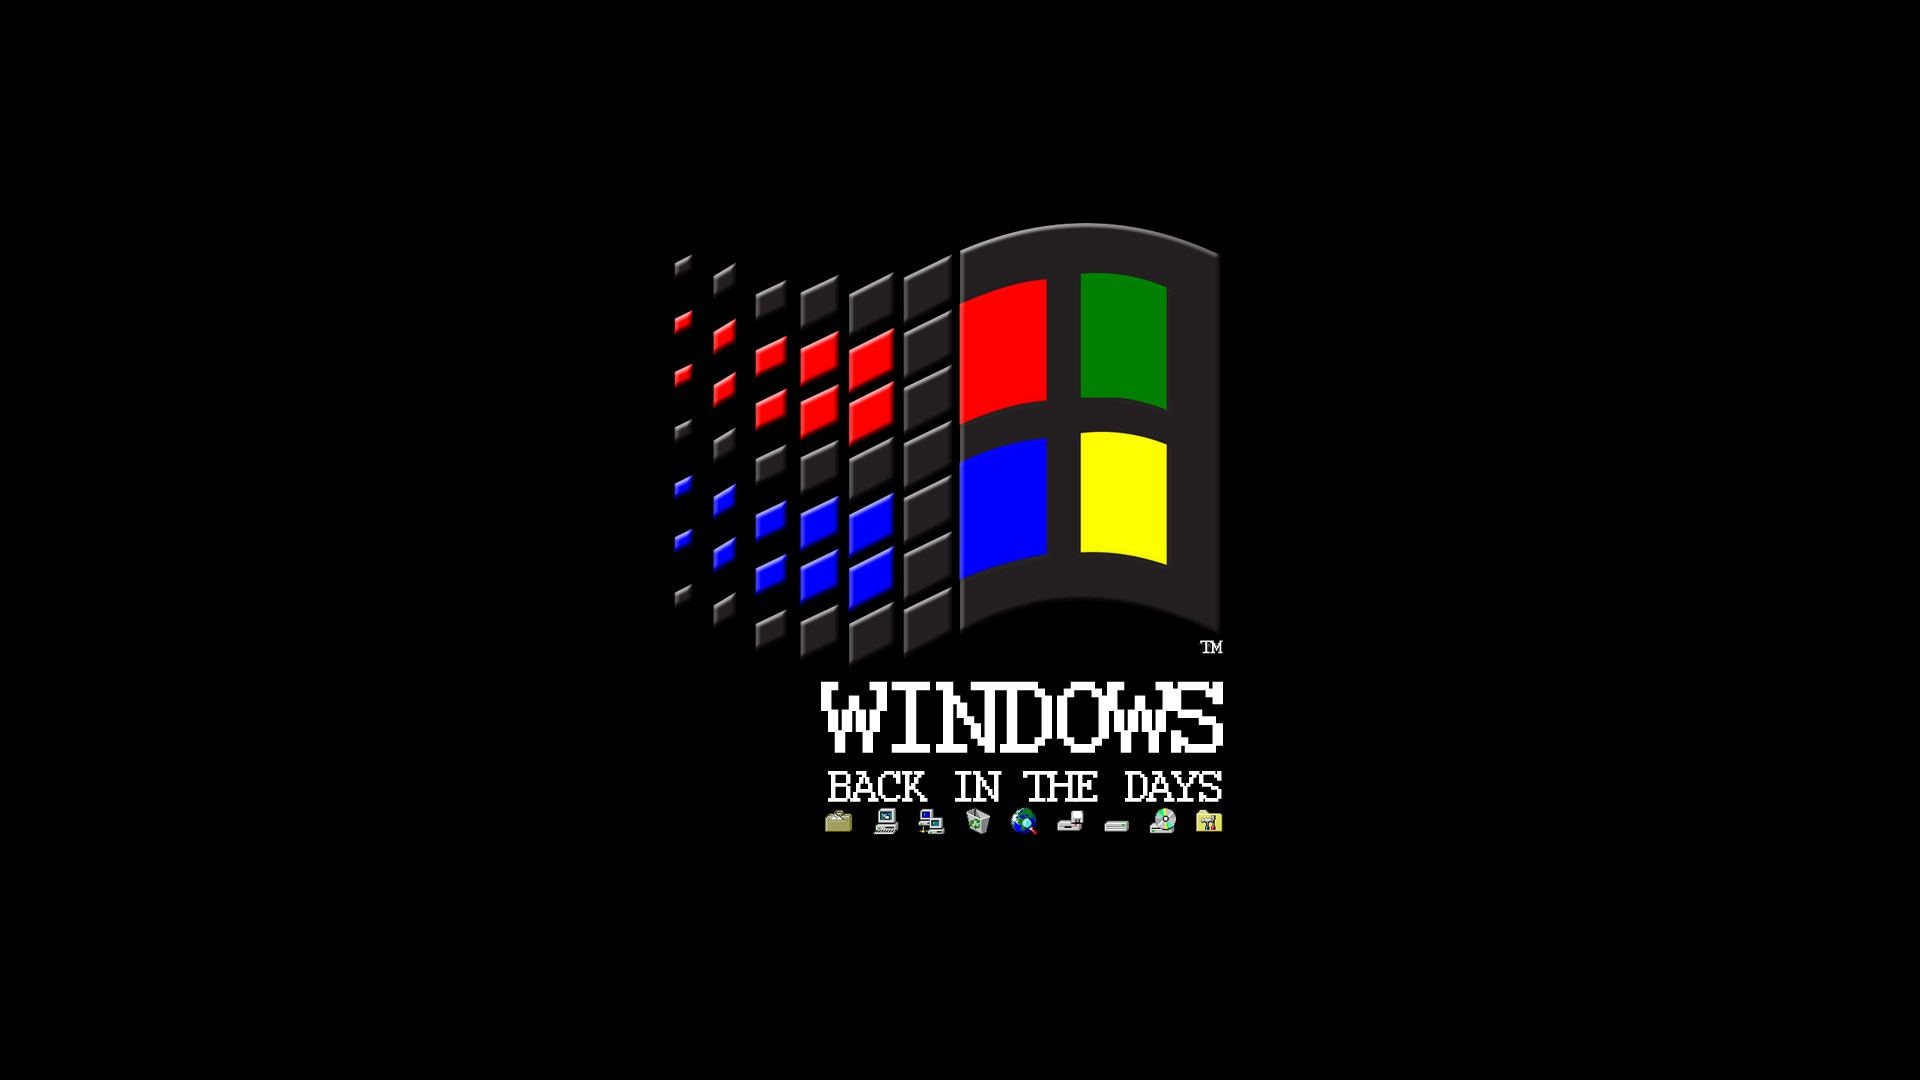 Back Operating Systems The Days Microsoft Windows Logos Old